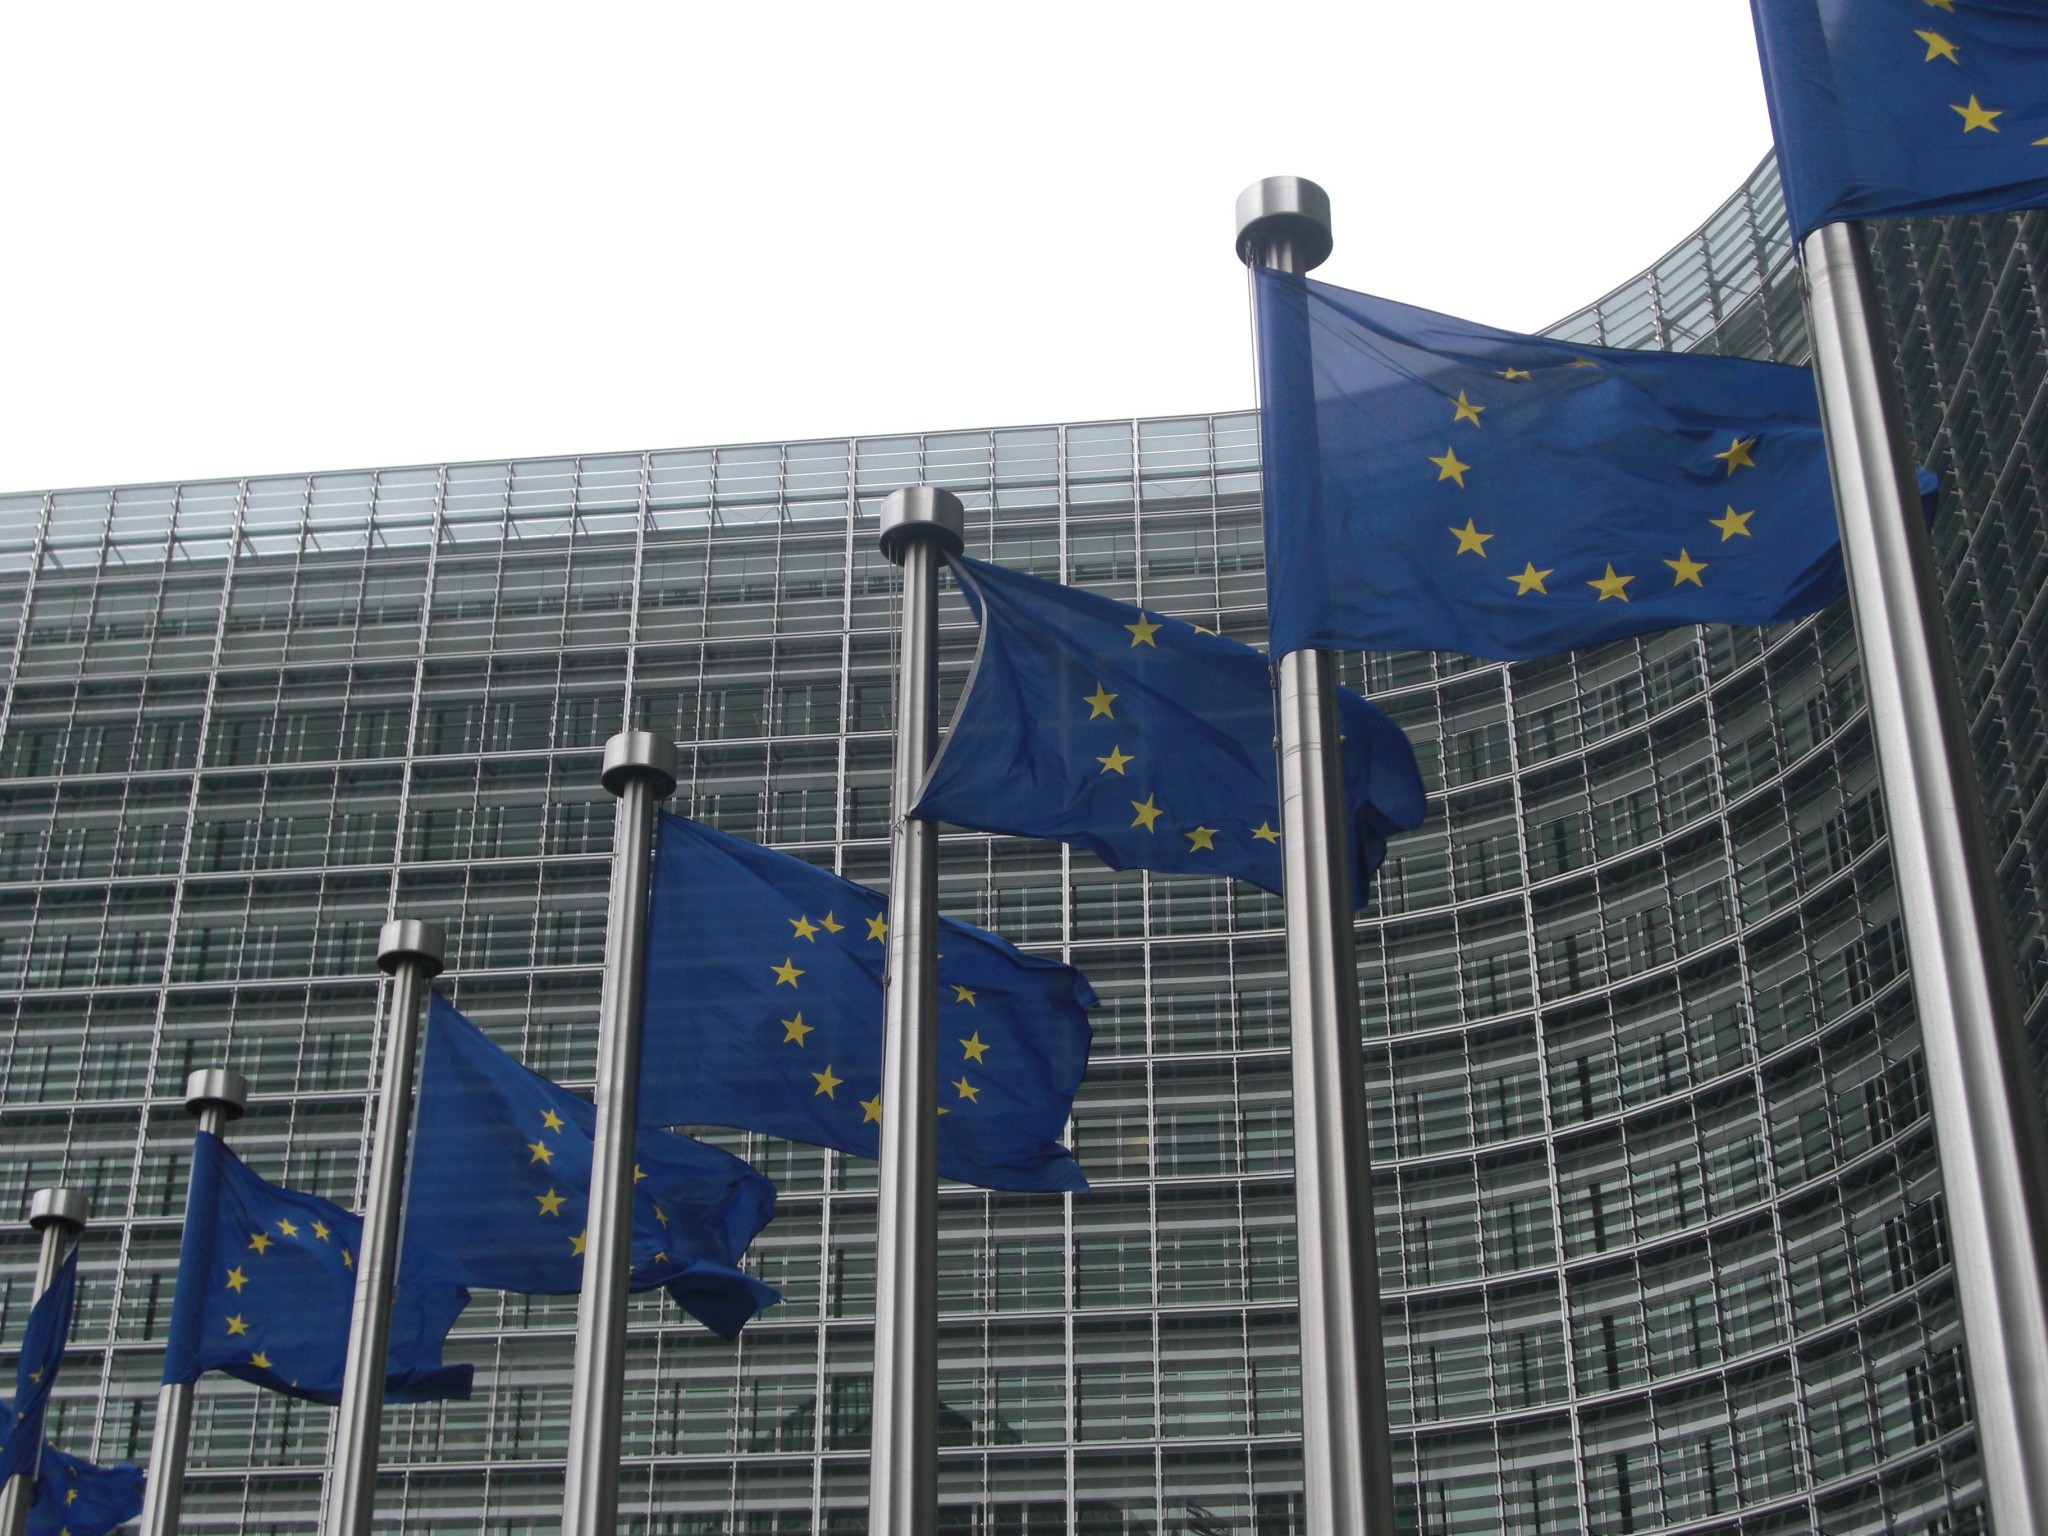 EC launches tyre industry antitrust investigation in “several member states”